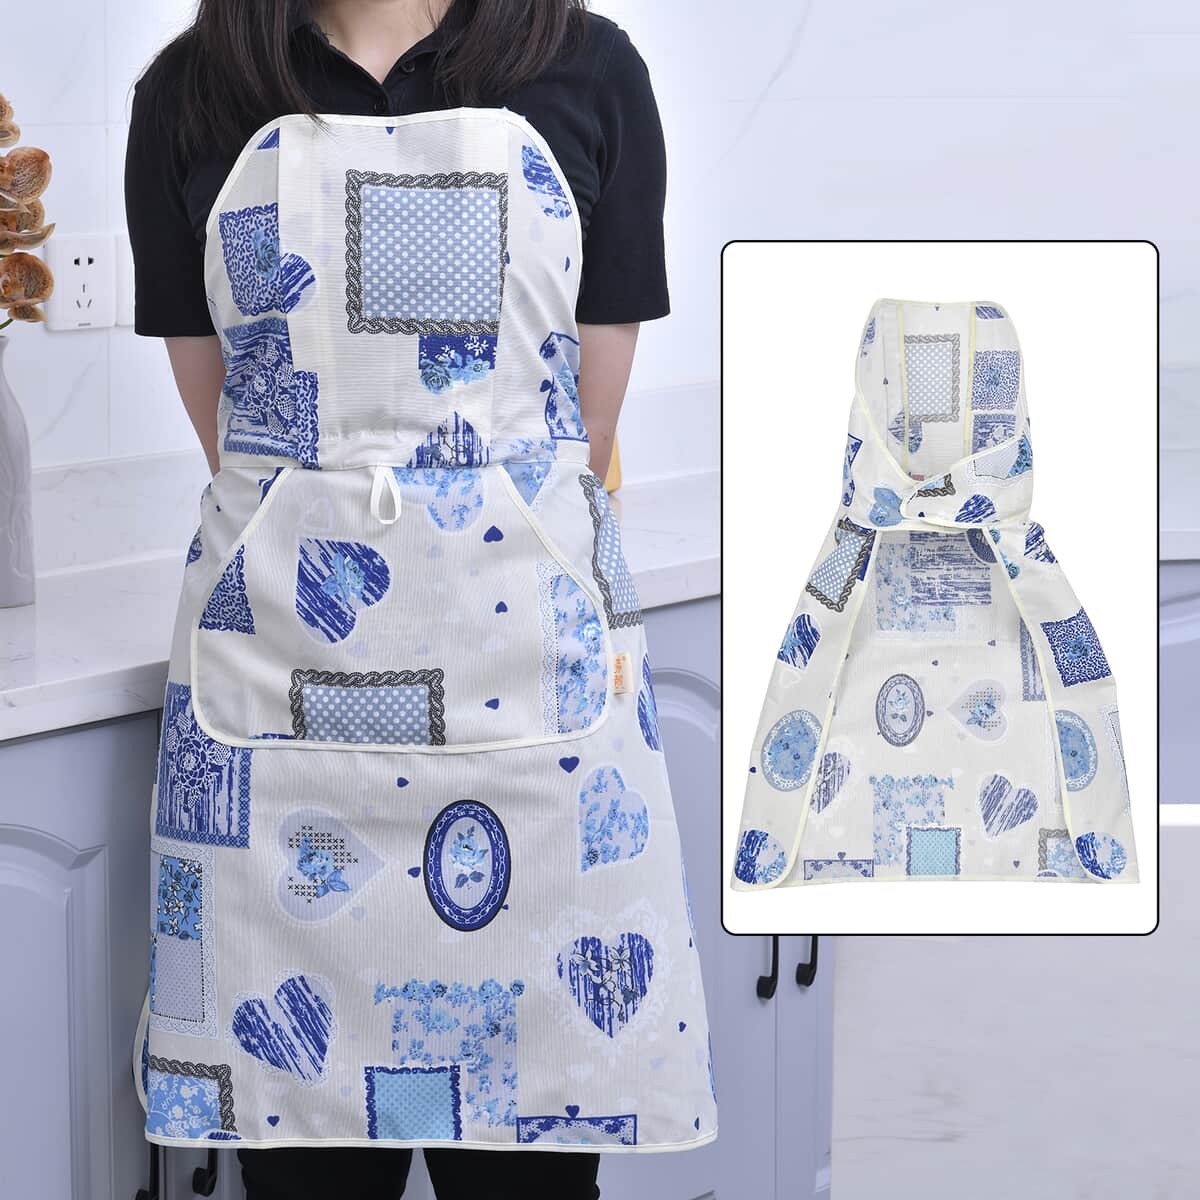 HOMESMART White and Blue Cotton Tie-Free Apron (31.5"x27.56") image number 1